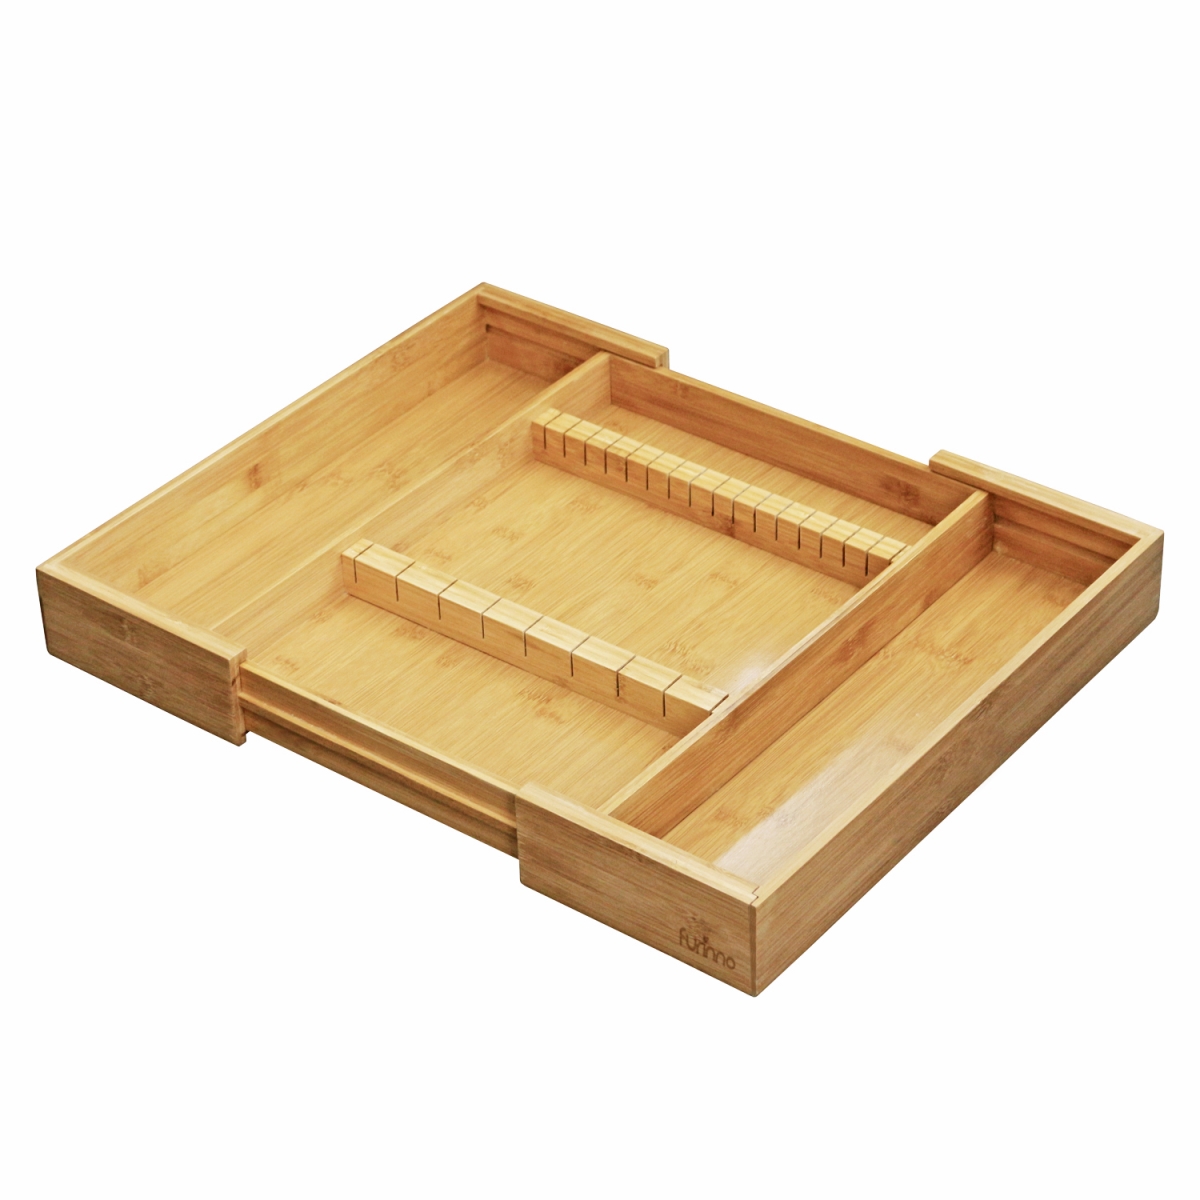 Fk8720 Dapur Bamboo Expandable Drawer Organizer With Cutlery Storage